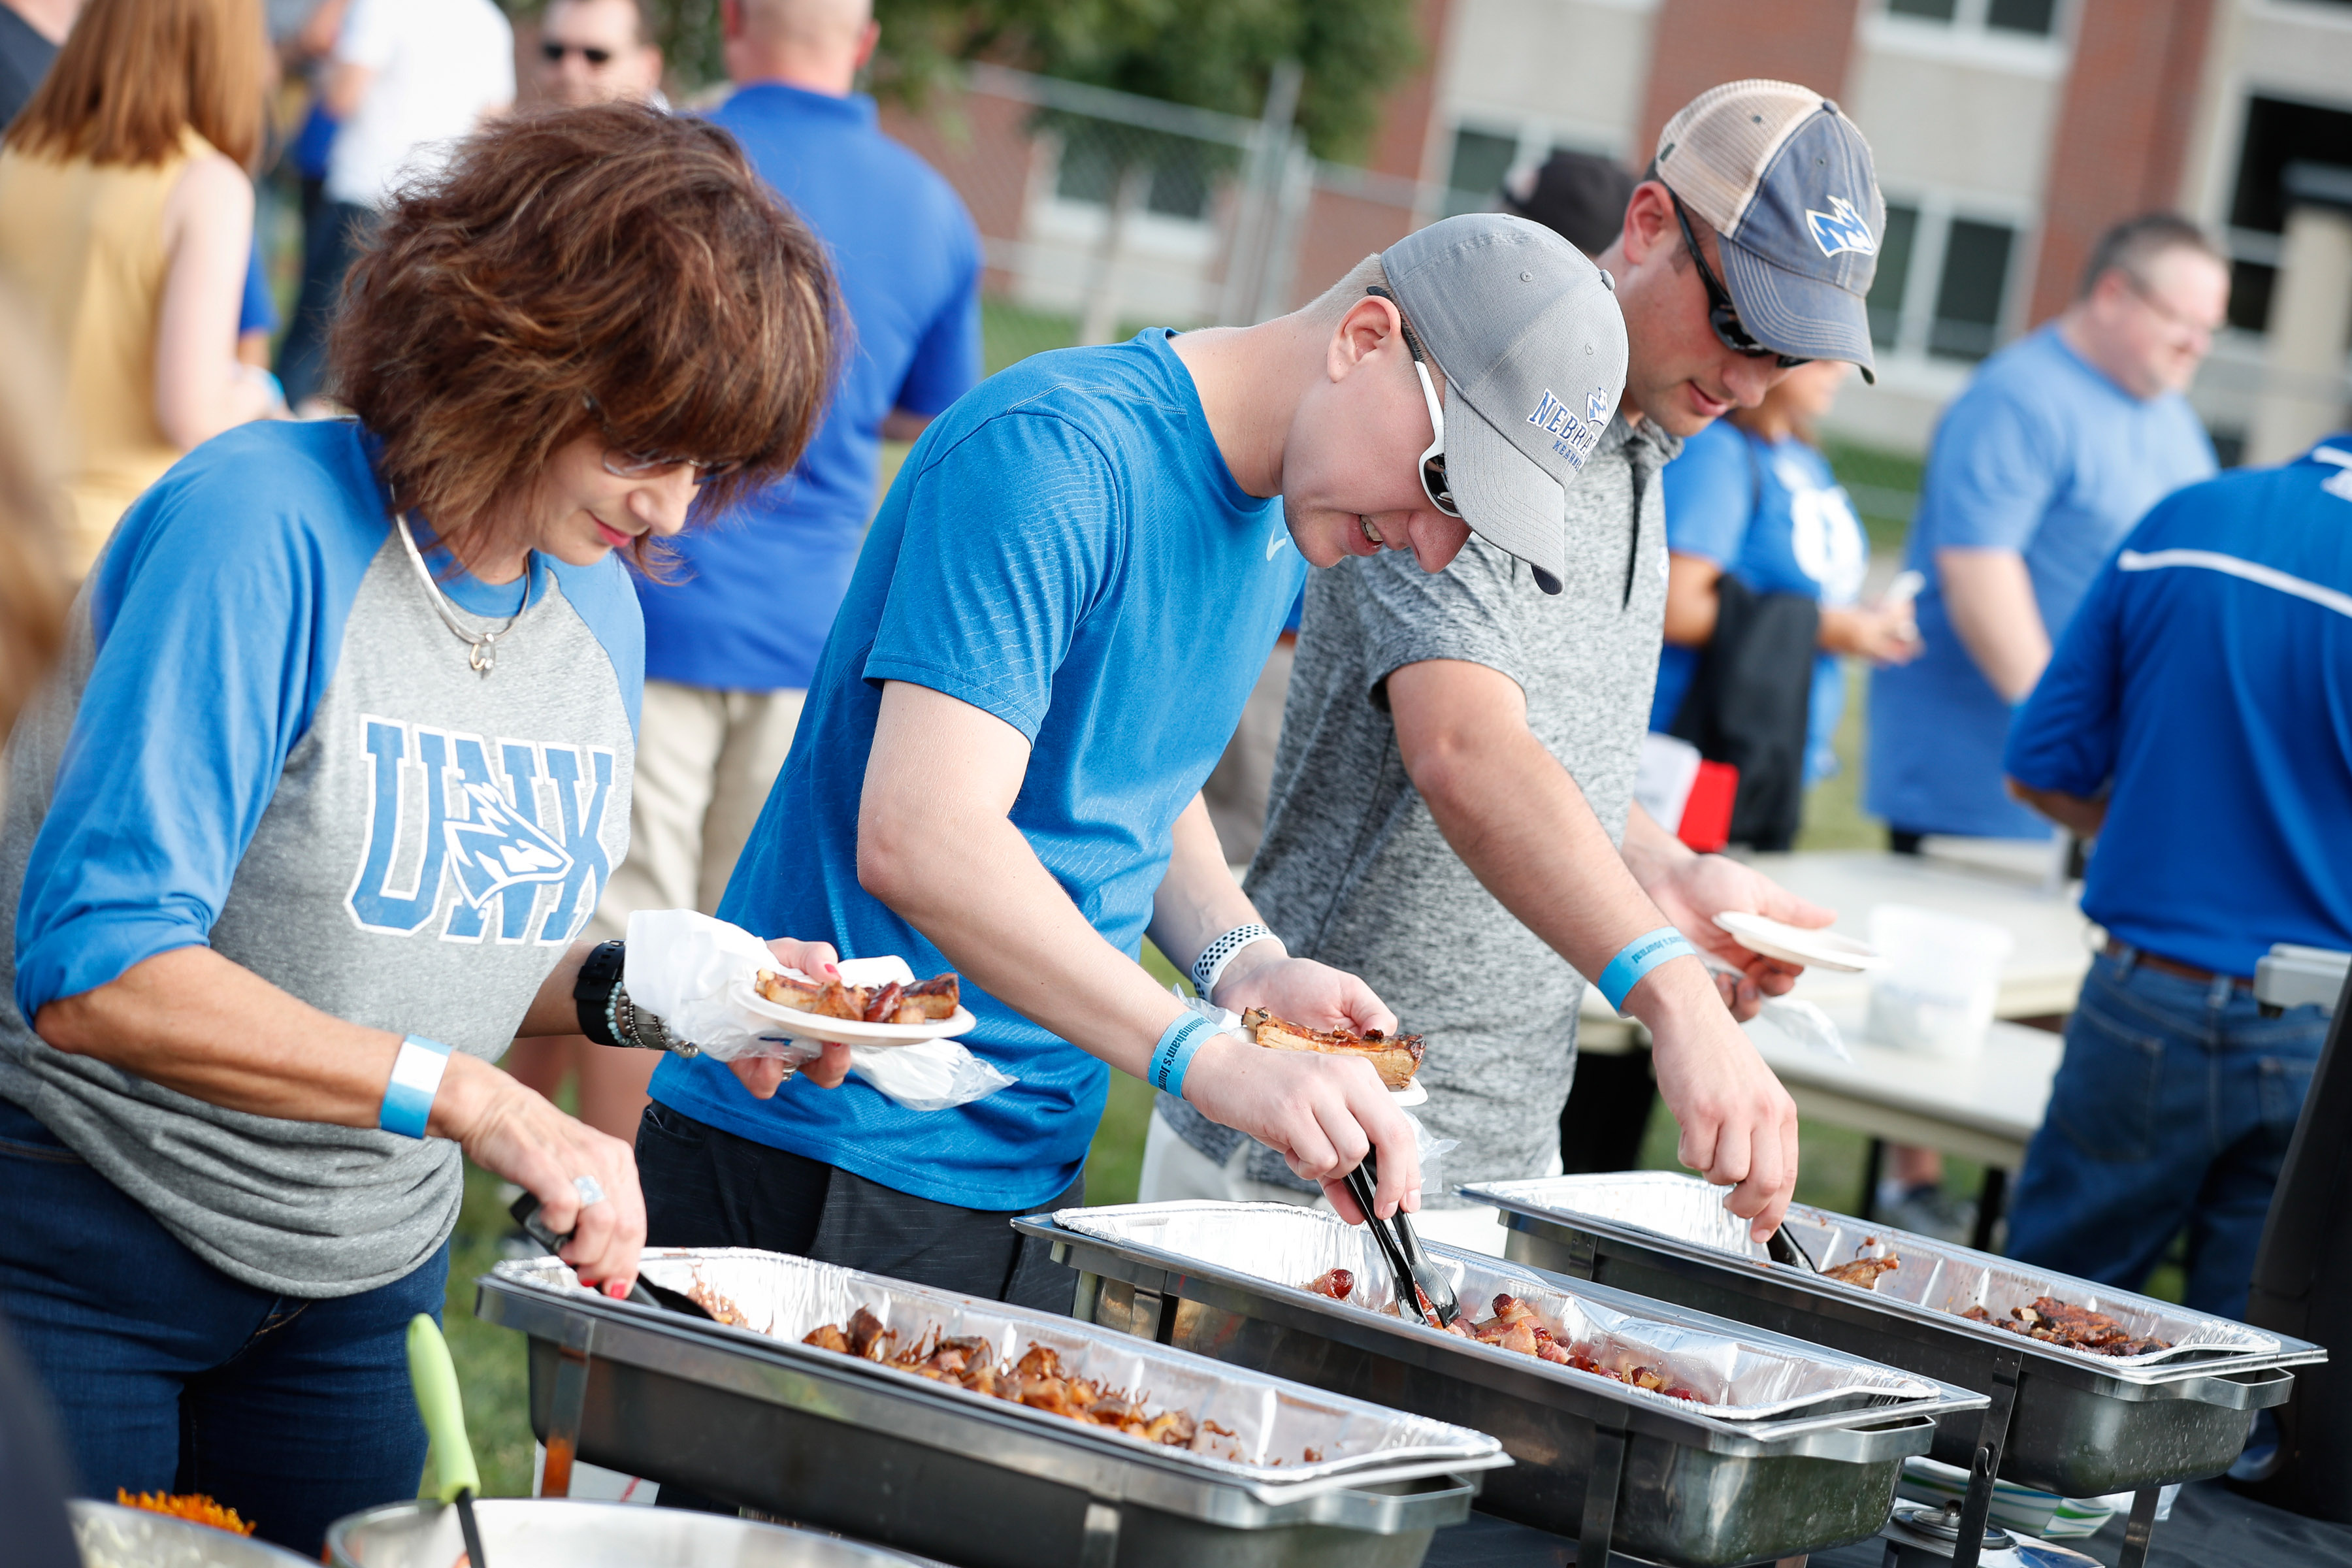 UNK is introducing a new tailgating event to generate more excitement at home football games. Loper Fan Fest features free food, live music, games and beverages, including alcohol for those 21 and older. (Photo by Corbey R. Dorsey, UNK Communications)